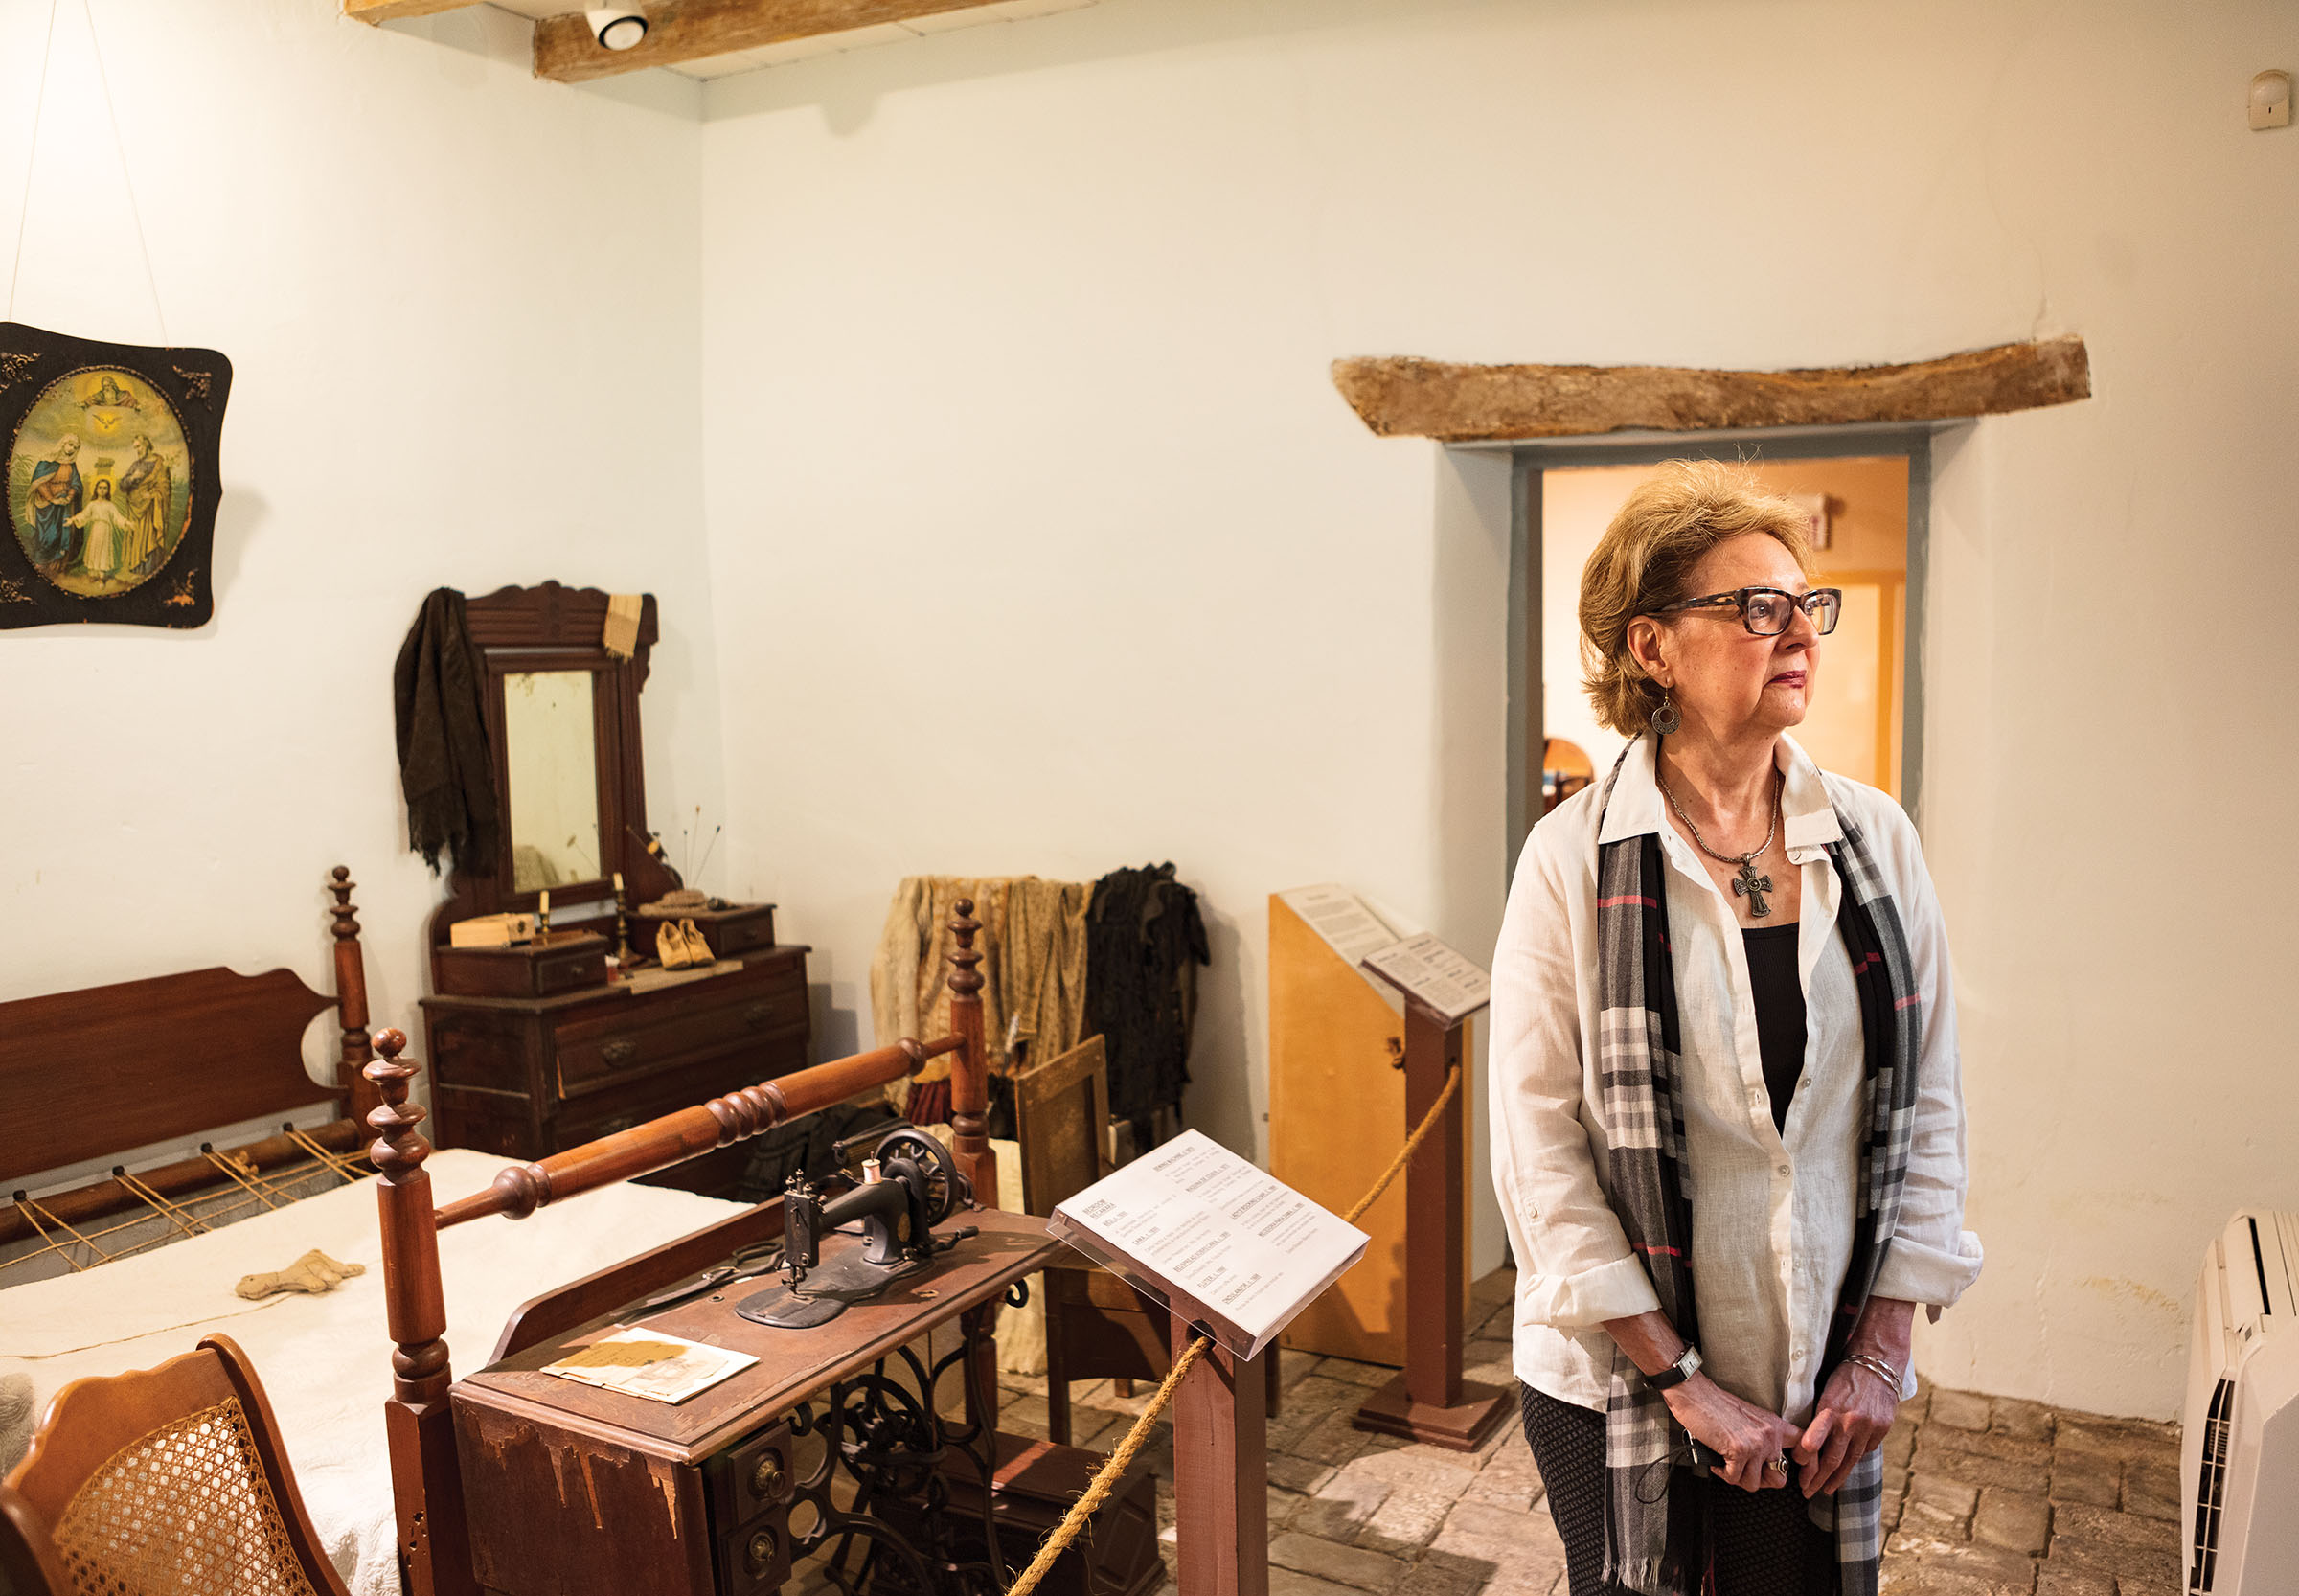 Awoman stands in a room filled with wooden antique furniture